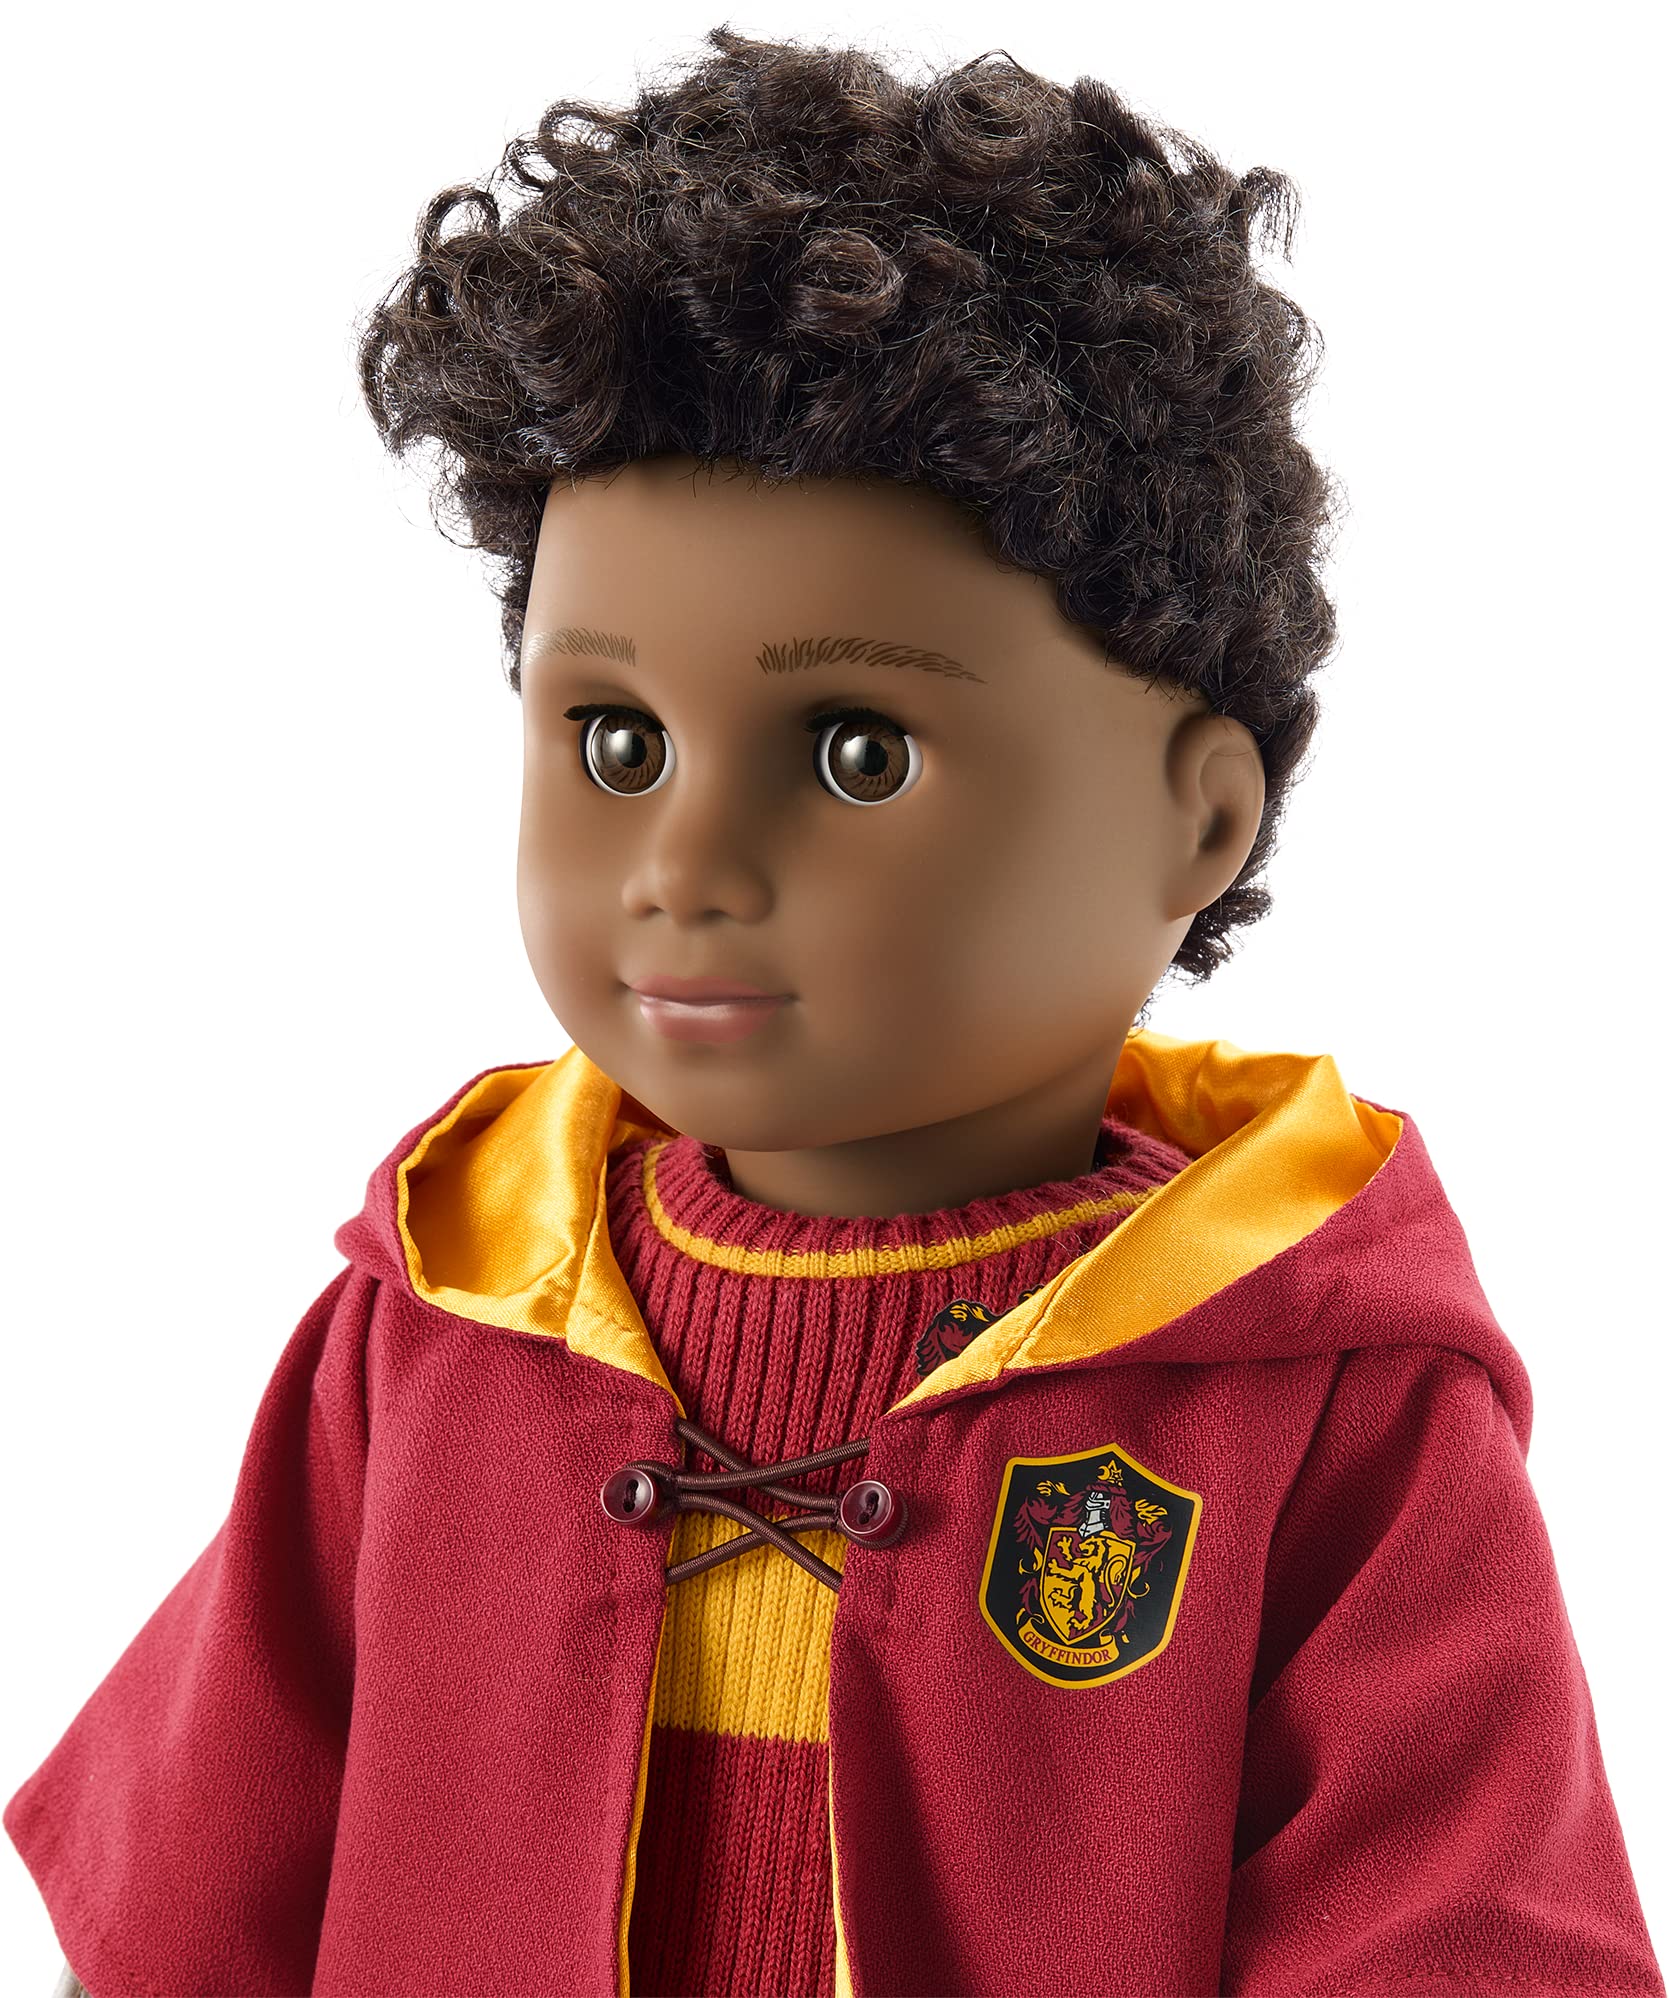 American Girl Harry Potter Gryffindor Quidditch 9-Piece Uniform for 18-inch Dolls with a red Robe, a Sweater, and Corduroy Pants Doll Not Included